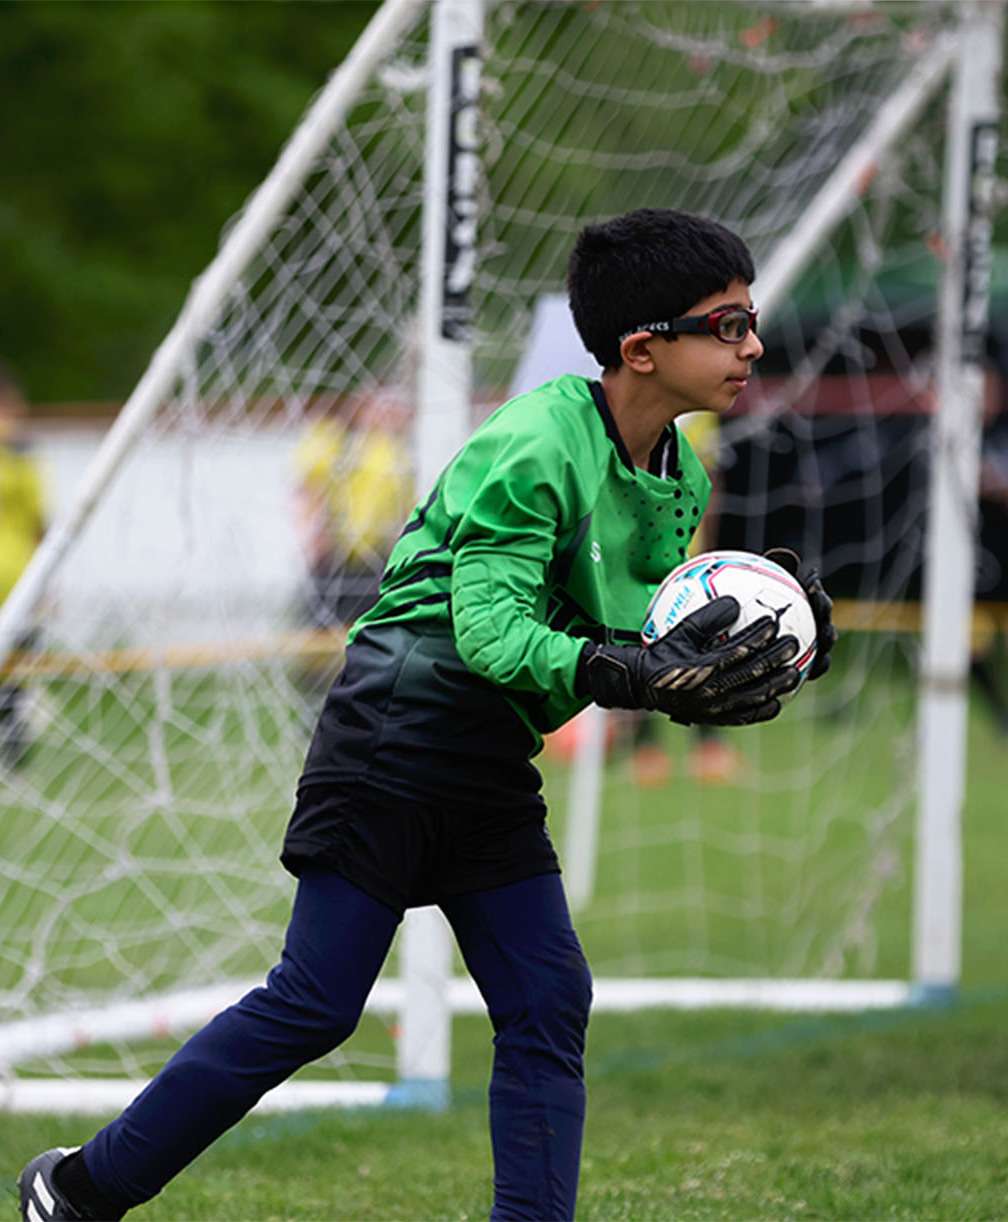 Young goalkeeper holds the ball